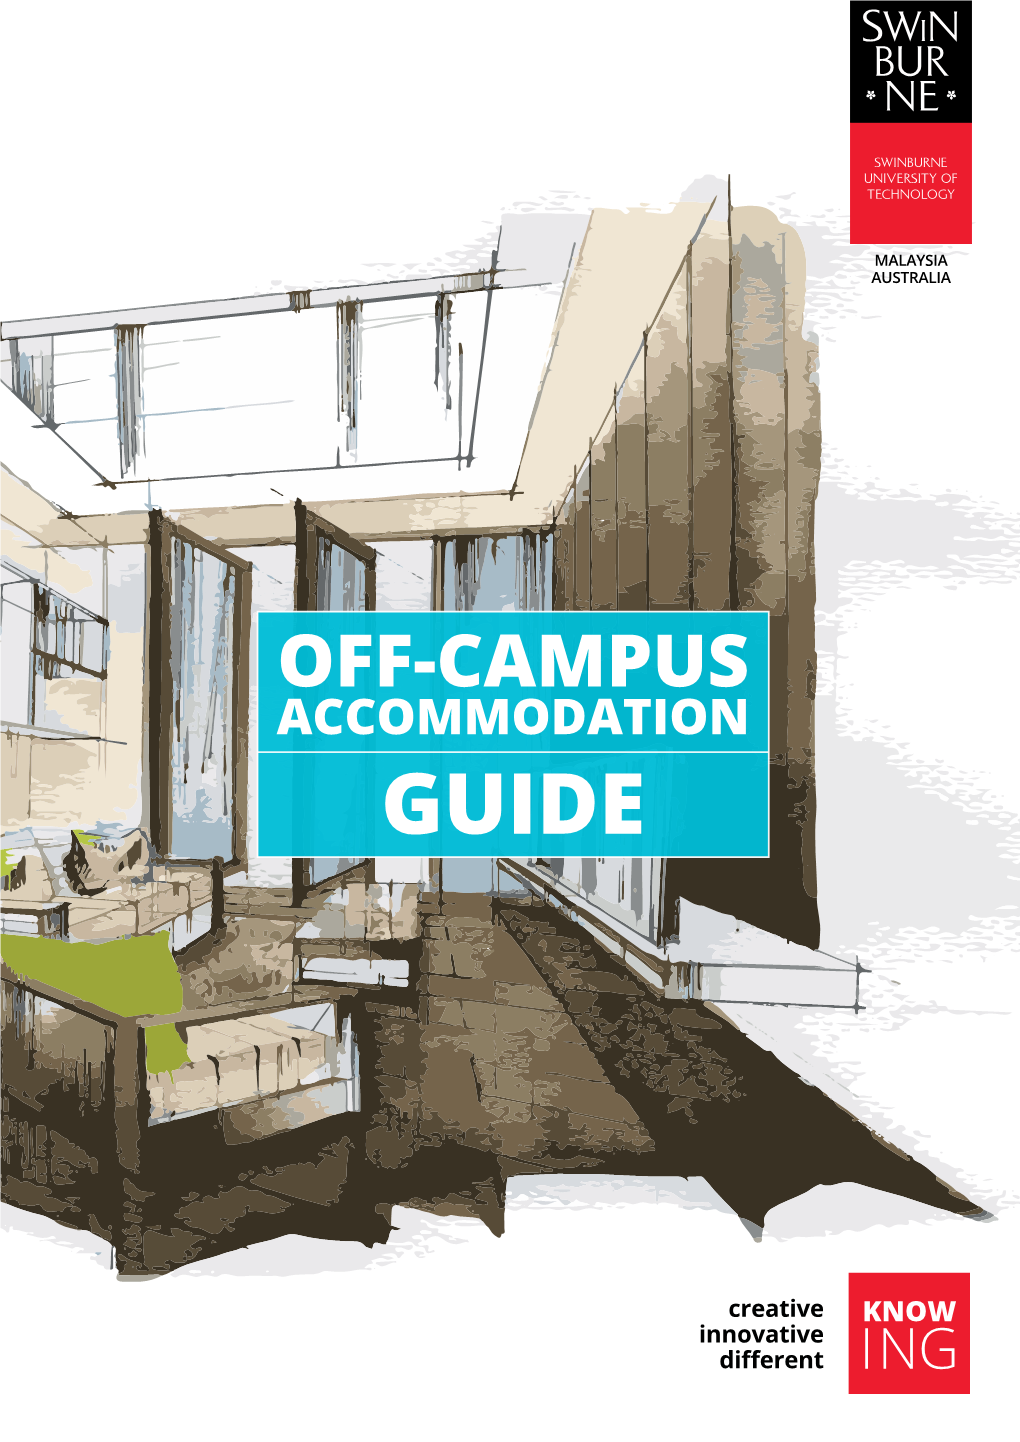 Off-Campus Accommodation Guide